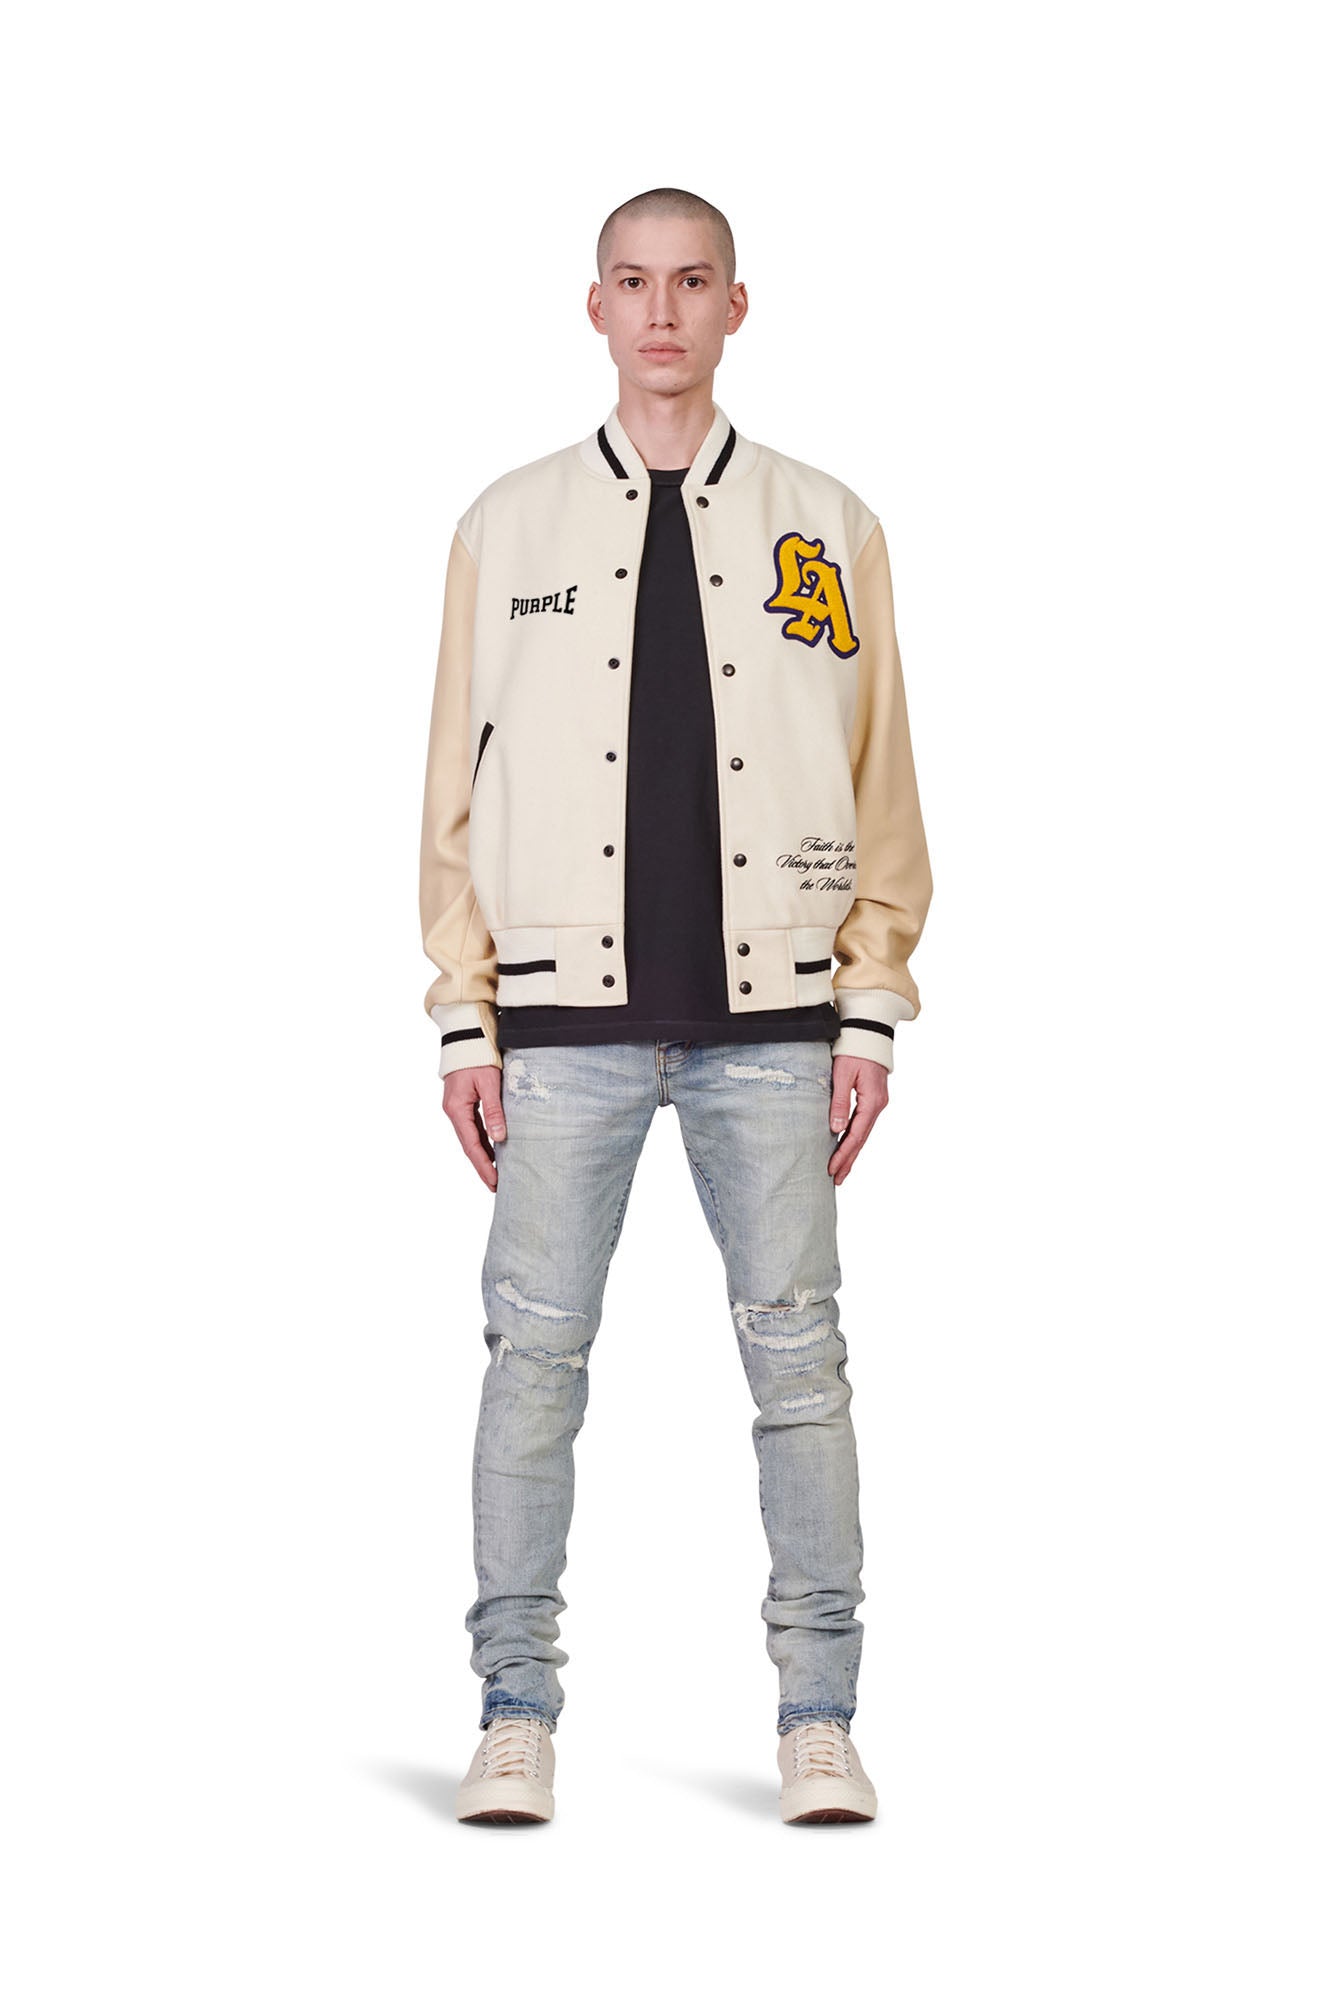 PURPLE BRAND - Men's Letterman Jacket - Style No. P320 - Golden Bear White and Gold - Model Front Pose